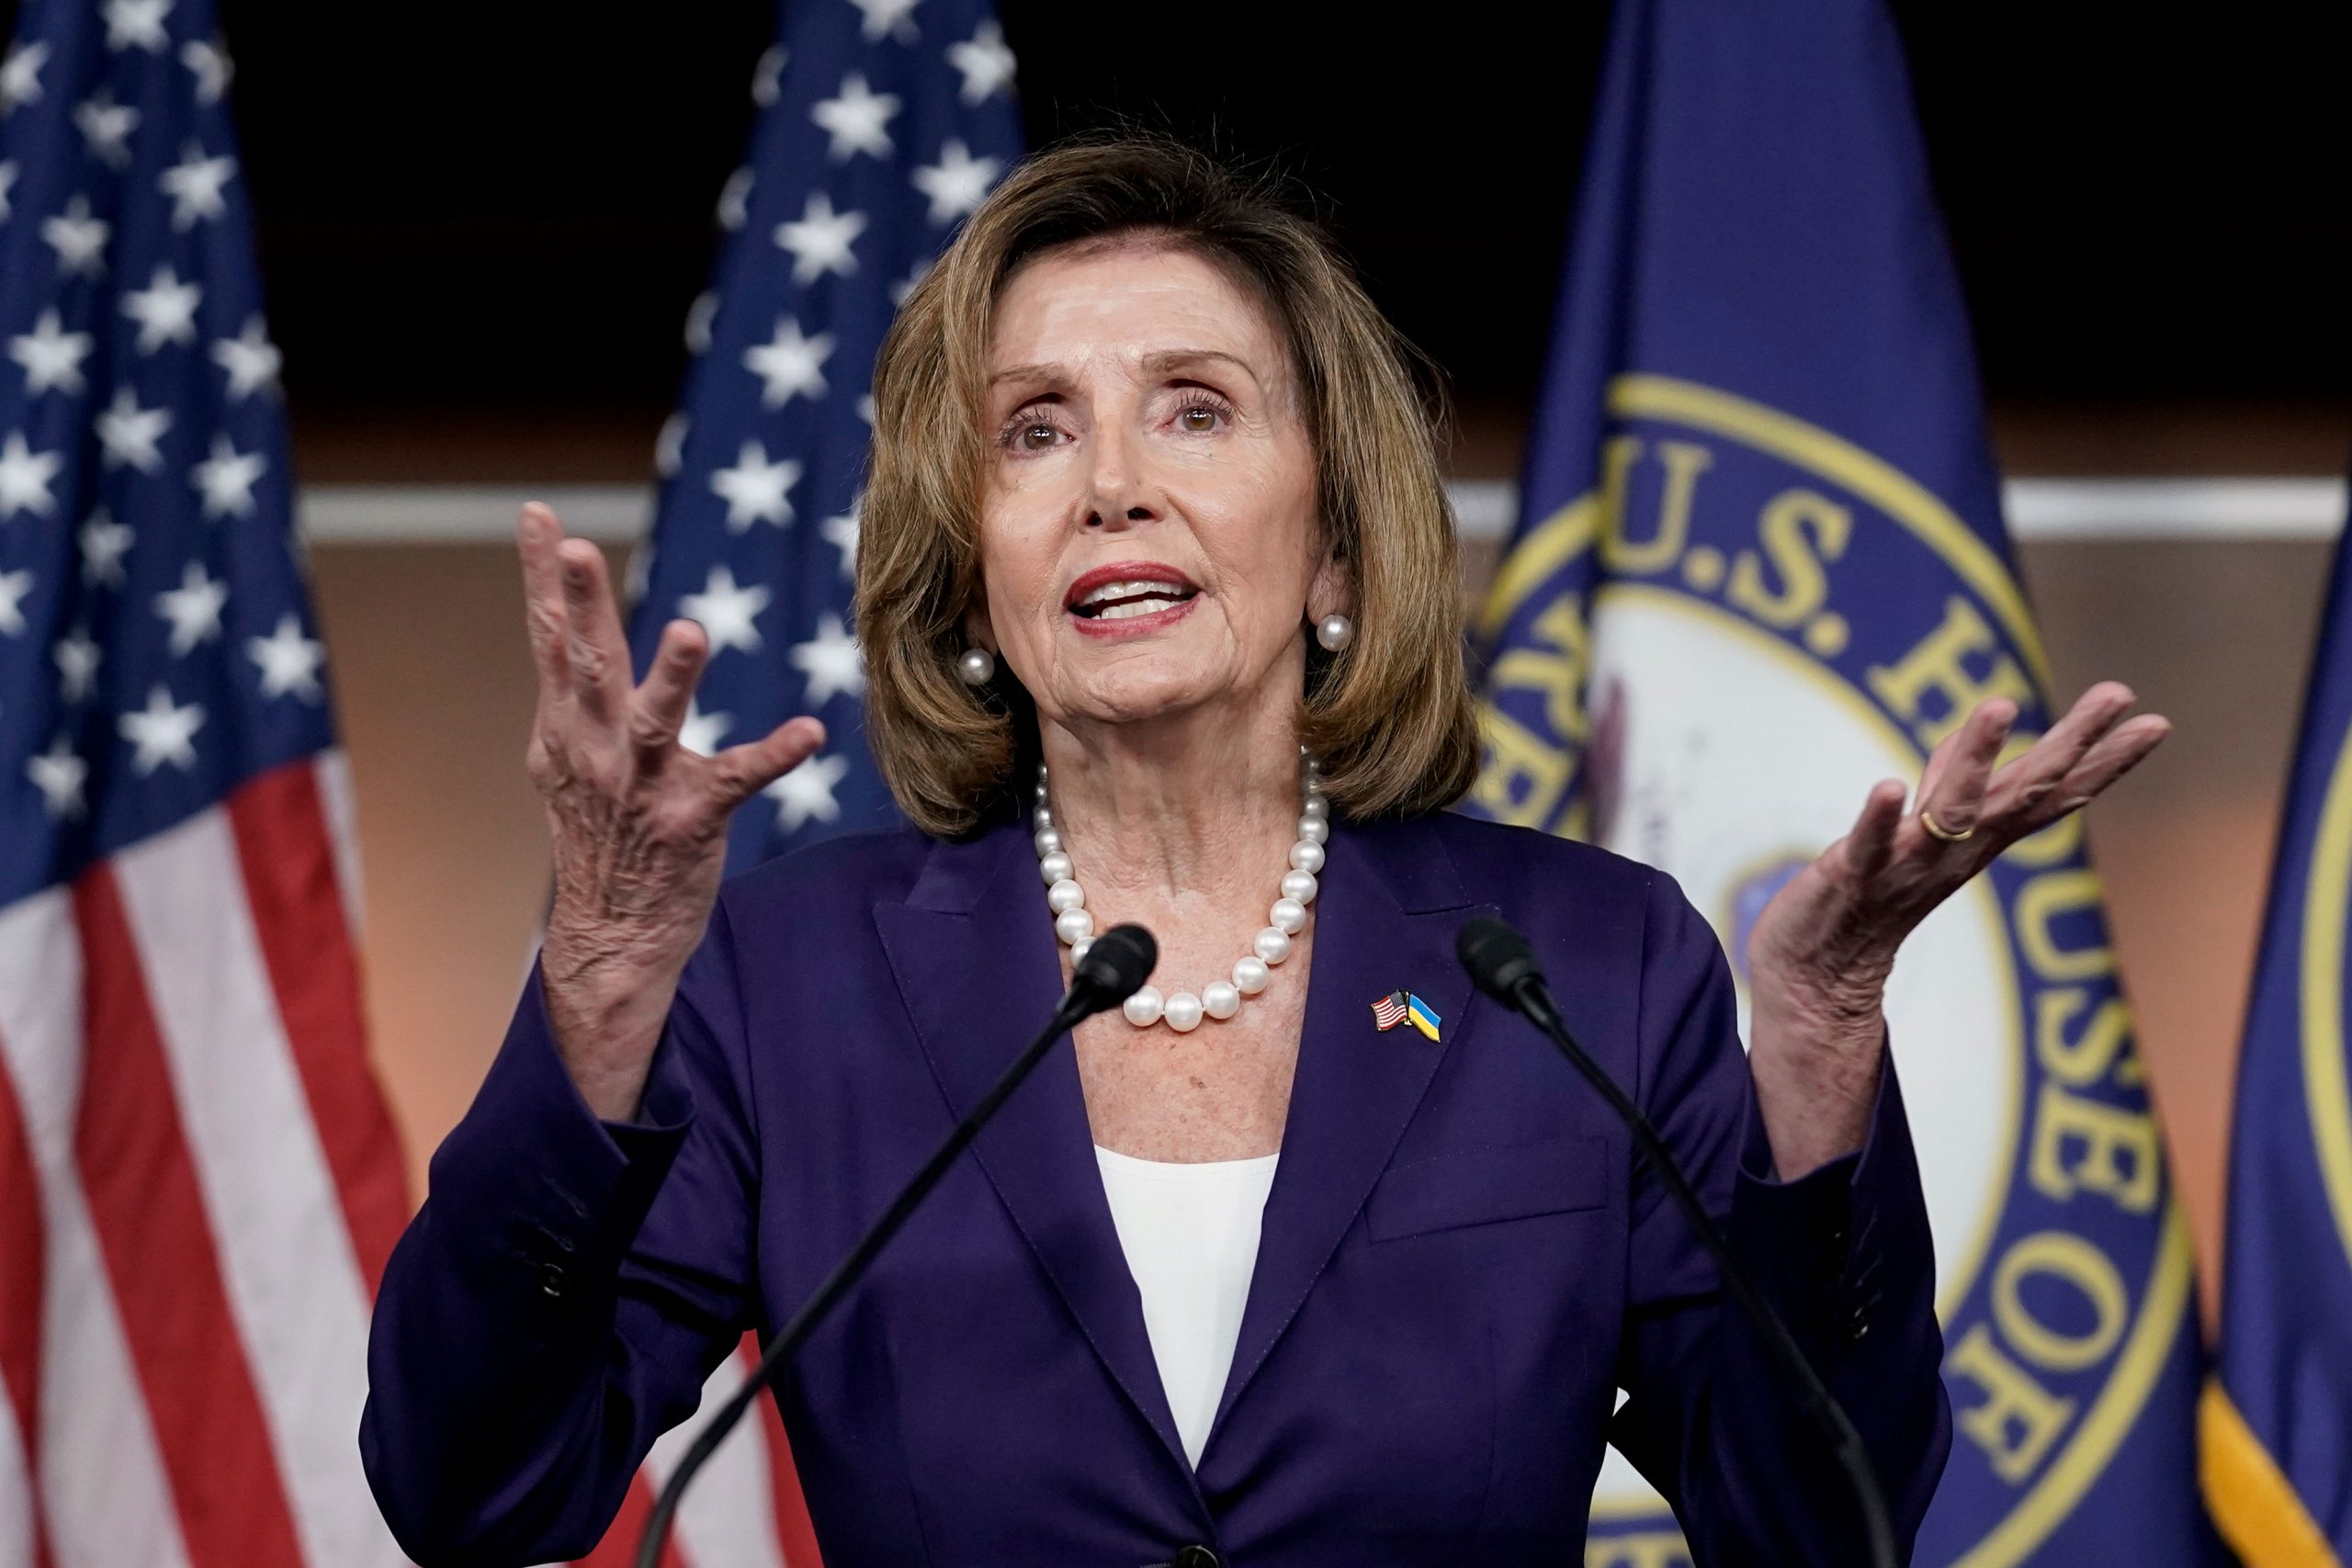 US House Speaker Nancy Pelosi looks to ‘swiftly’ pass climate and healthcare spending bill